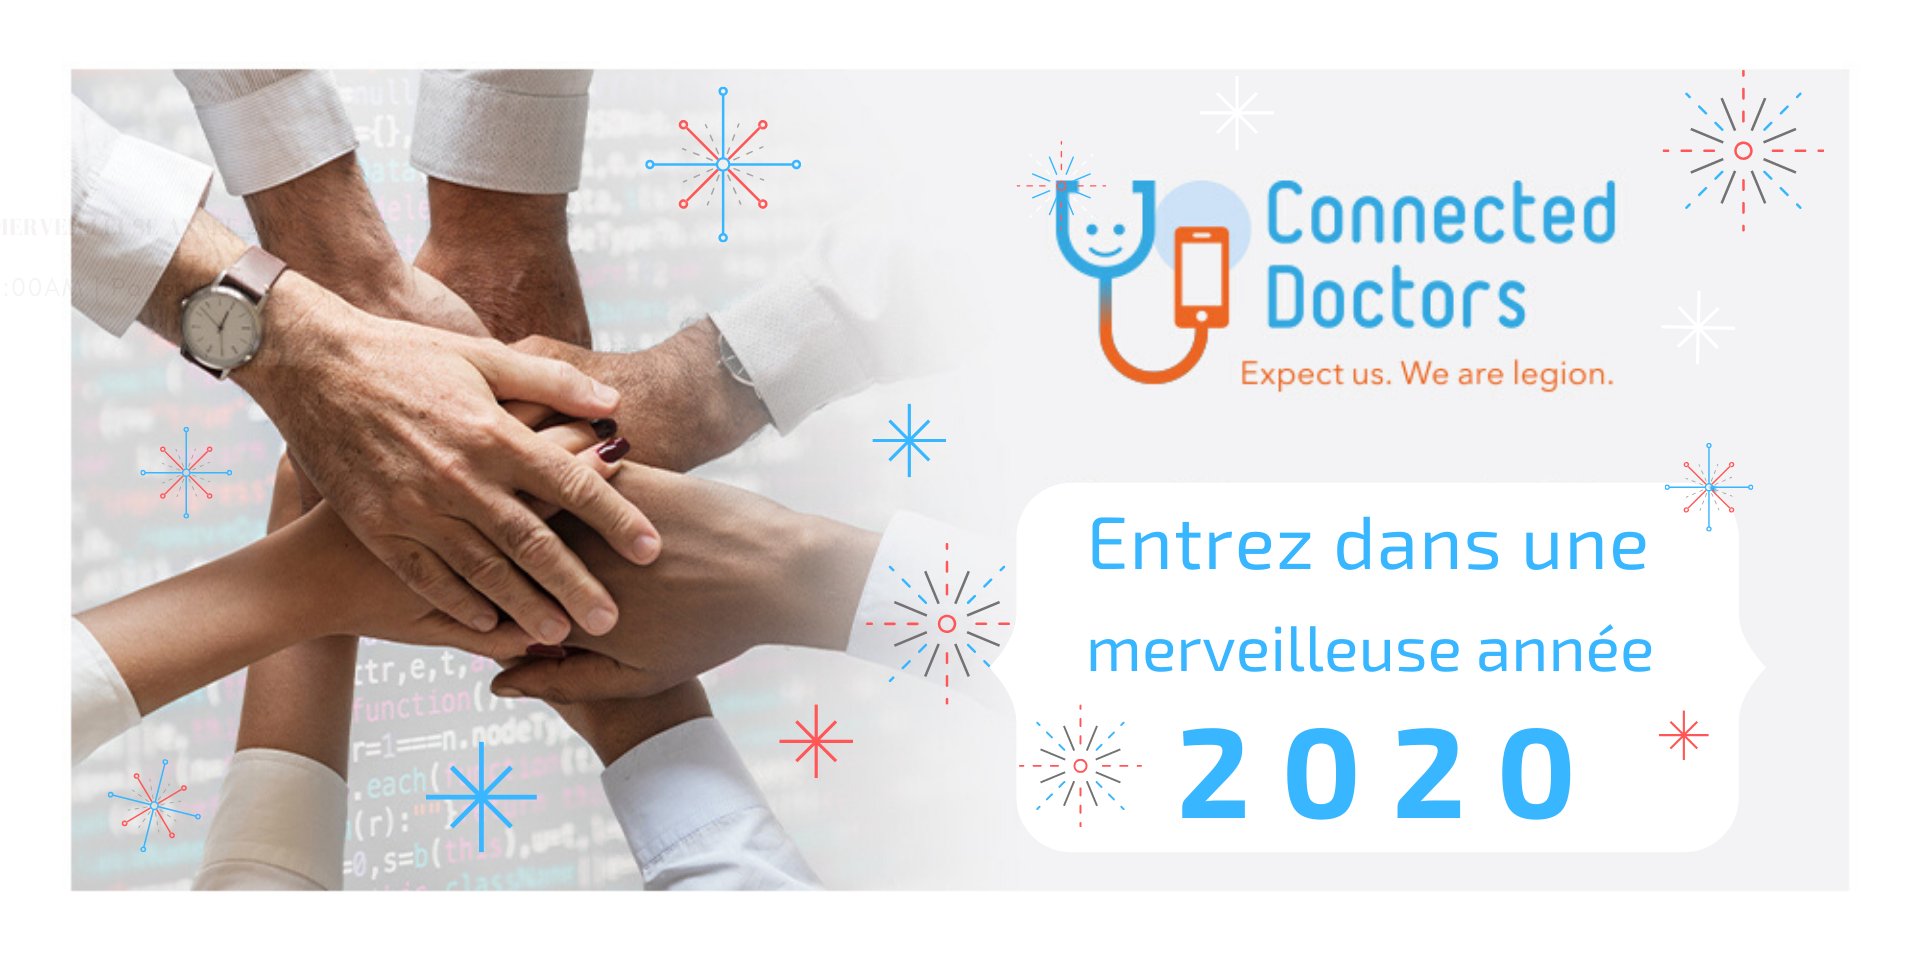 Vision Connected Doctors 2020